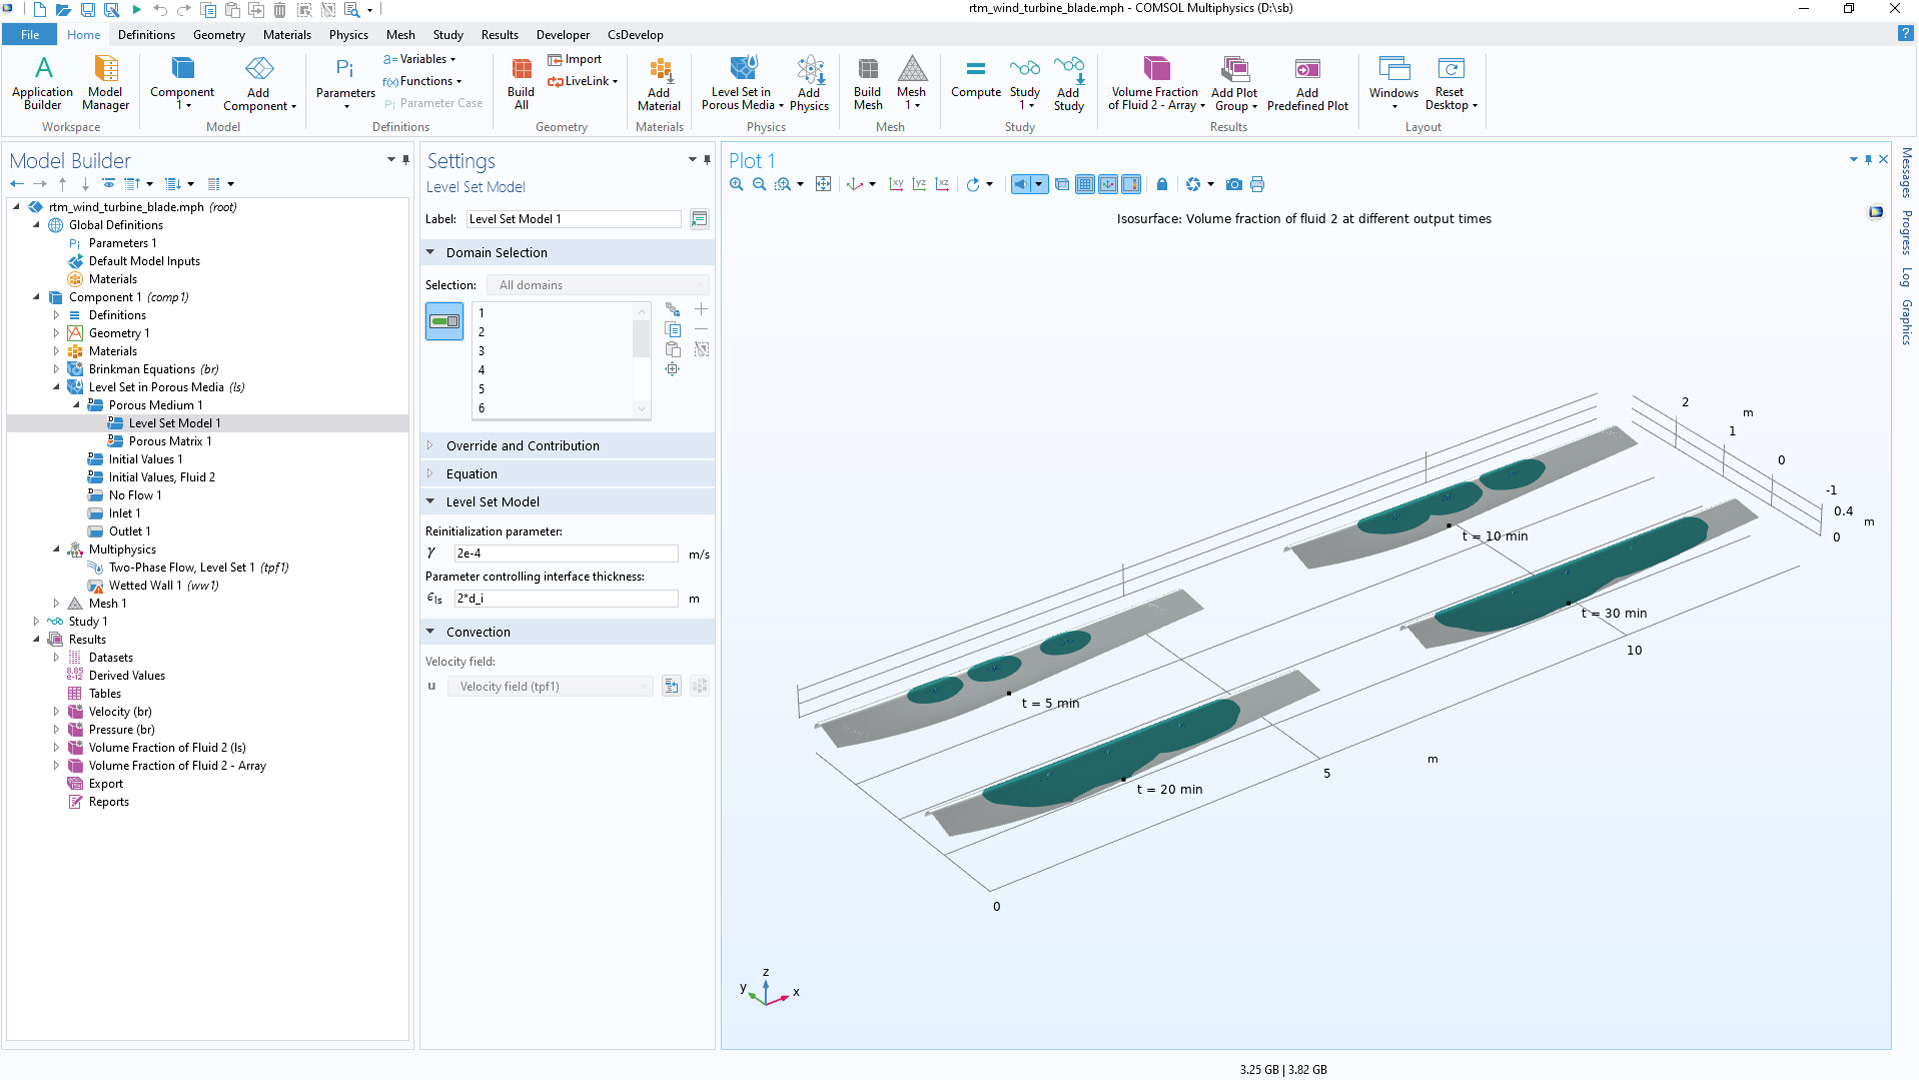 The COMSOL Multiphysics UI showing the Model Builder with the Level Set Model subnode selected, the corresponding Settings window, and the Graphics window showing the wind turbine blade model.